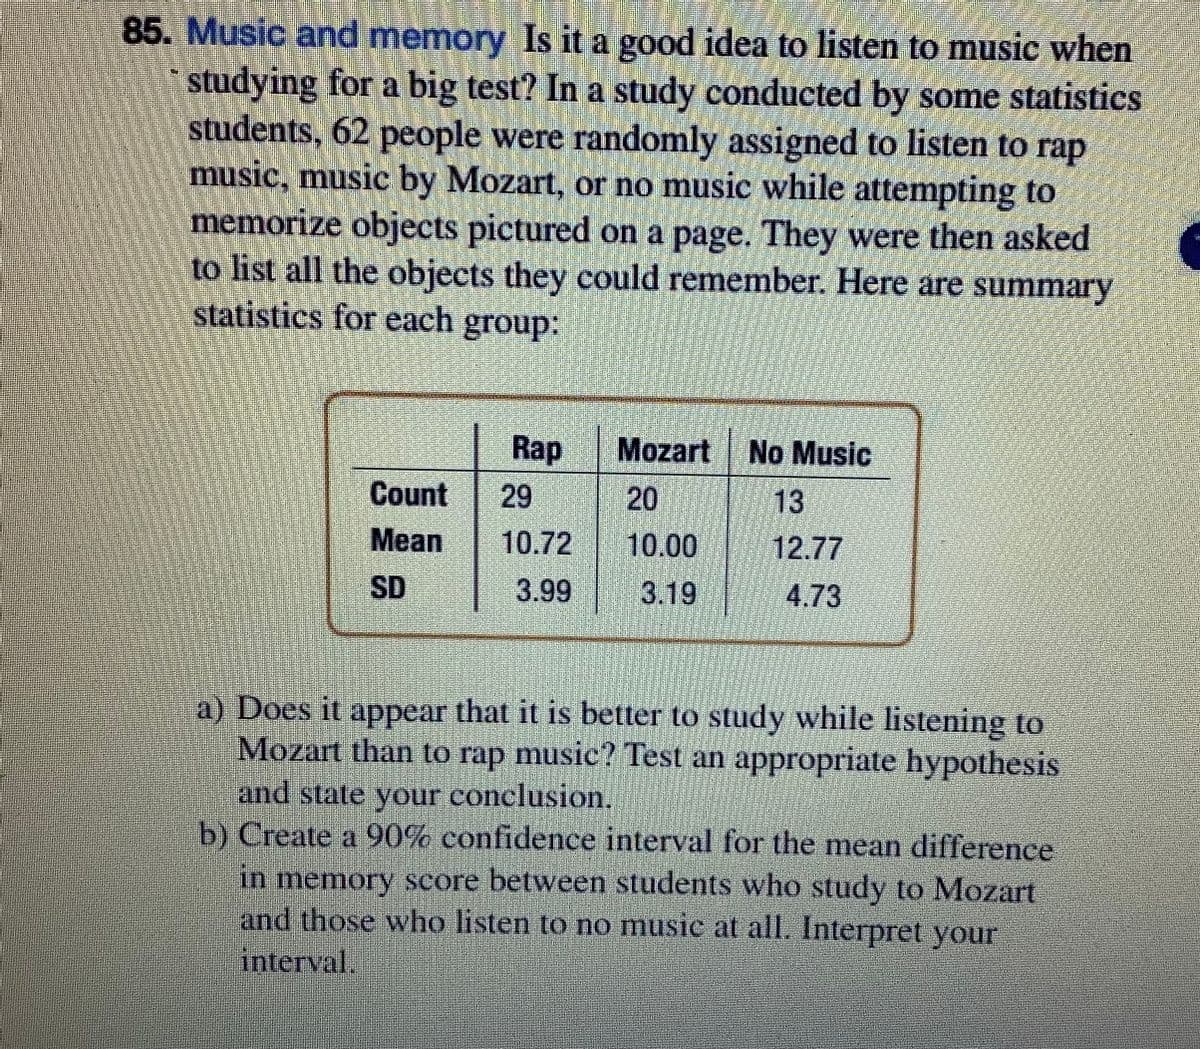 85. Music and memory Is it a good idea to listen to music when
studying for a big test? In a study conducted by some statistics
students, 62 people were randomly assigned to listen to rap
music, music by Mozart, or no music while attempting to
memorize objects pictured on a page. They were then asked
to list all the objects they could remember. Here are summary
statistics for each group:
Rap
Mozart No Music
20
Count
29
13
Mean
10.72
10.00
12.77
SD
3.99
3.19
4.73
a) Does it appear that it is better to study while listening to
Mozart than to rap music? Test an appropriate hypothesis
and state your conclusion.
b) Create a 90% confidence interval for the mean difference
in memory score between students who study to Mozart
and those who listen to no music at all. Interpret your
interval.
